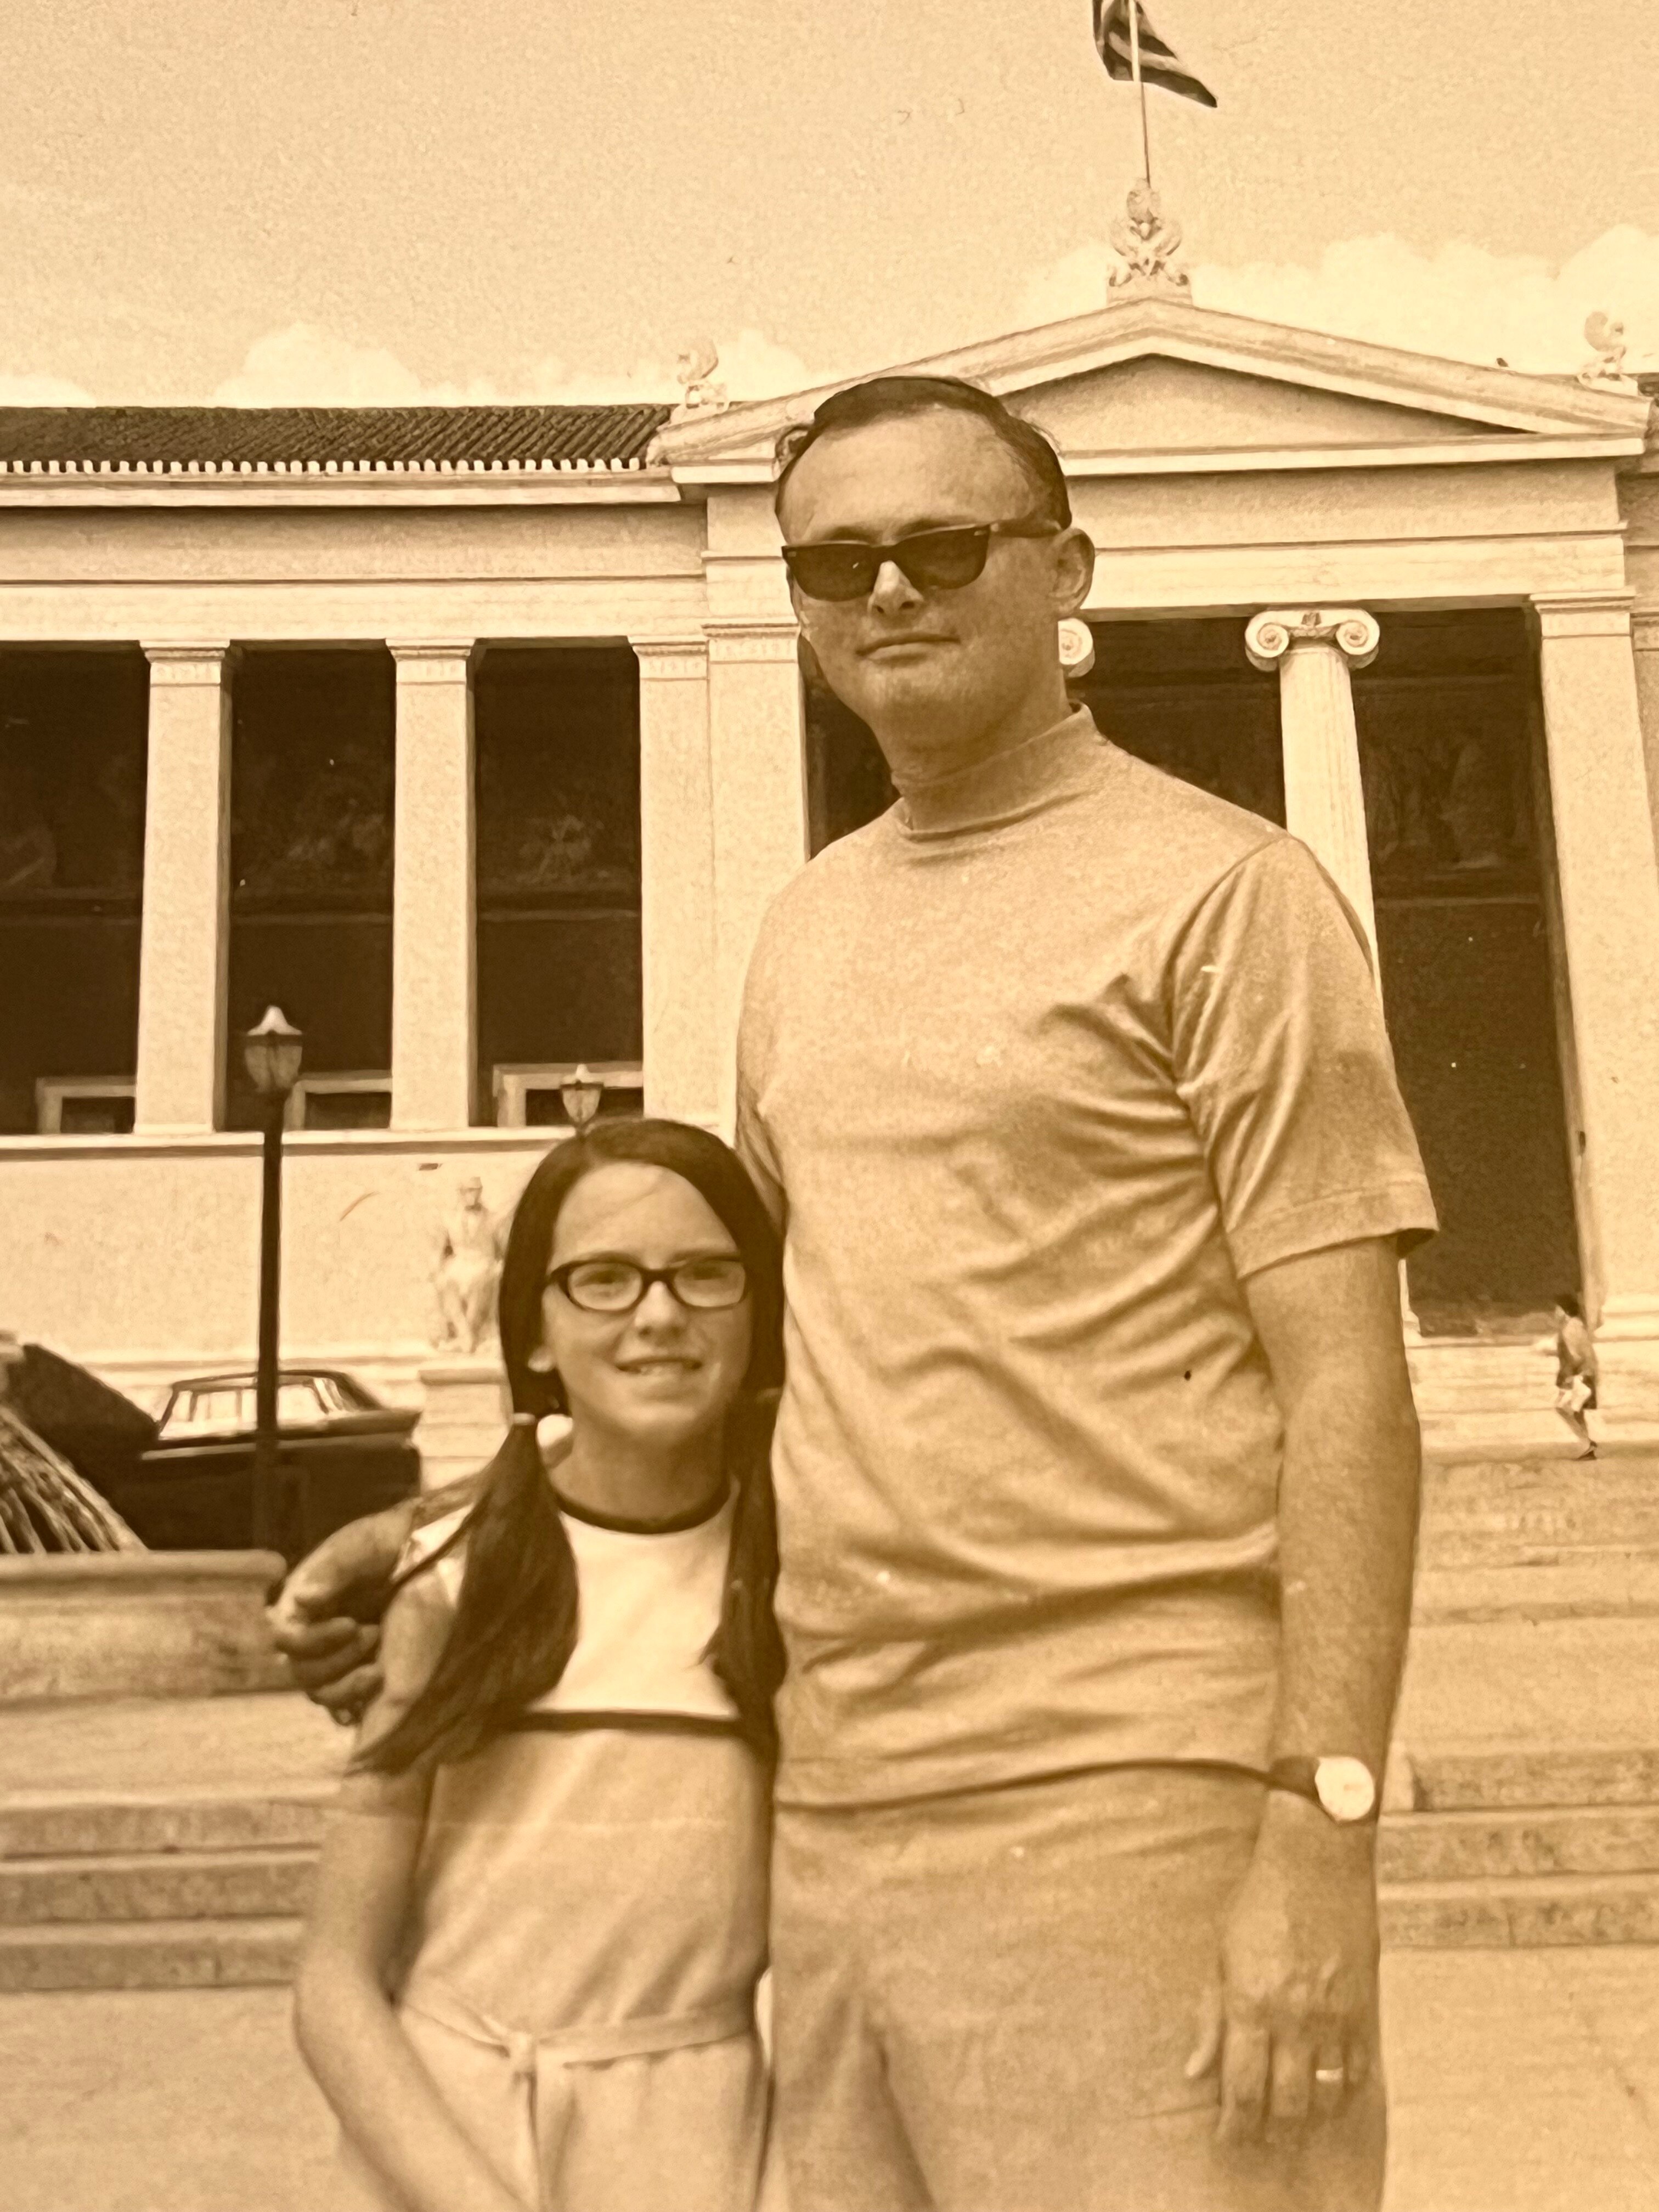 Black and white photo of a young Cynthia Dearborn with plaits standing next to her father, wearing a shirt and sunglasses.